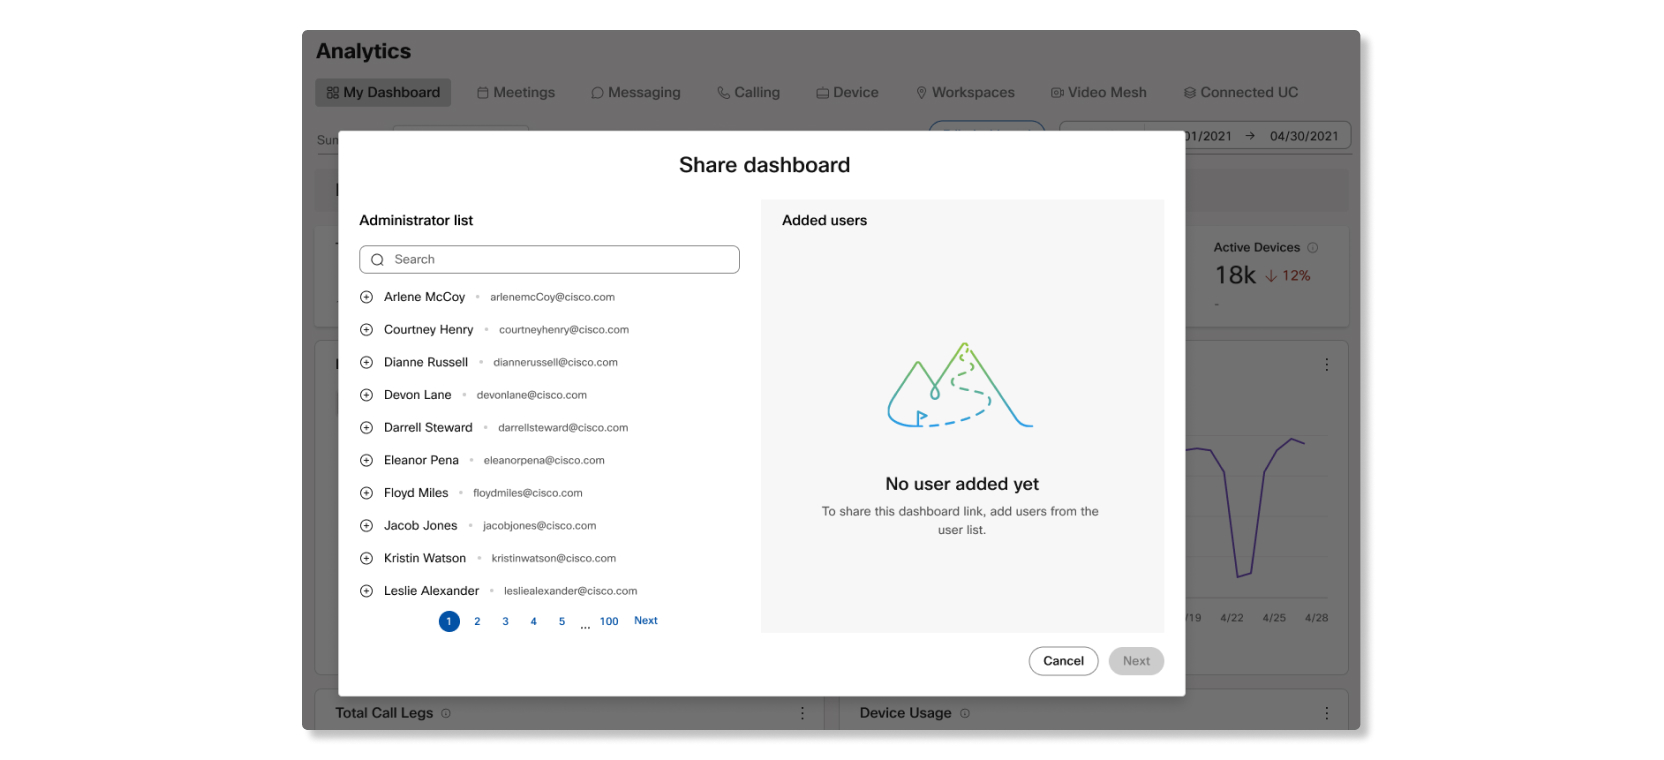 Add users to share a custom dashboard example